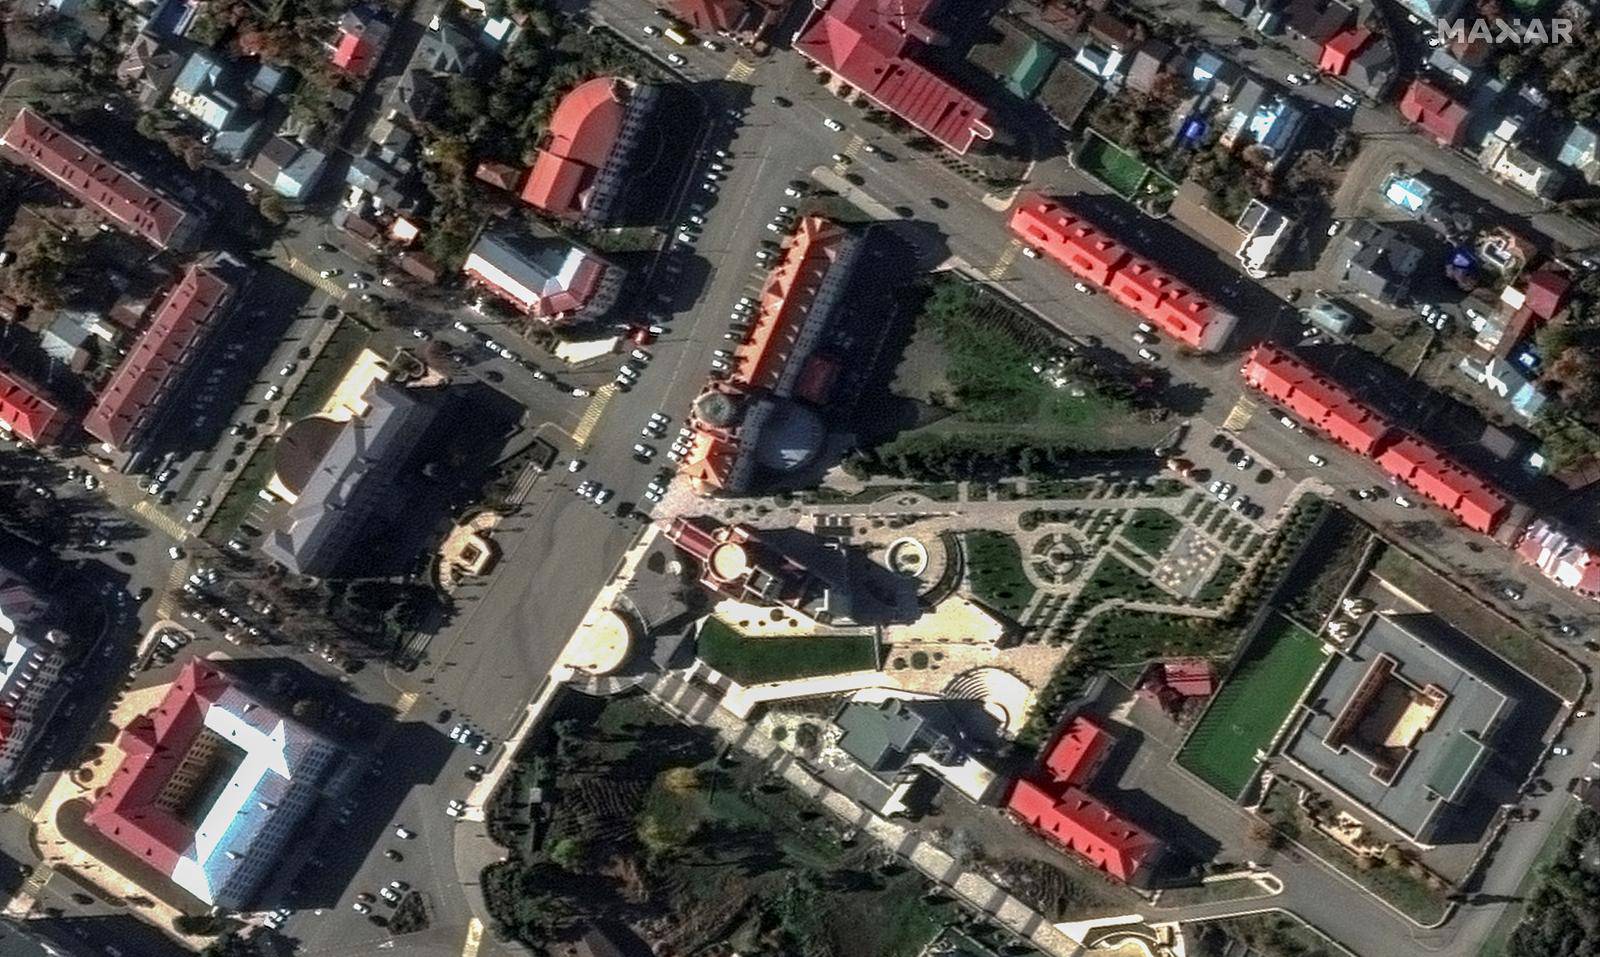 A satellite image shows downtown of the city of Stepanakert